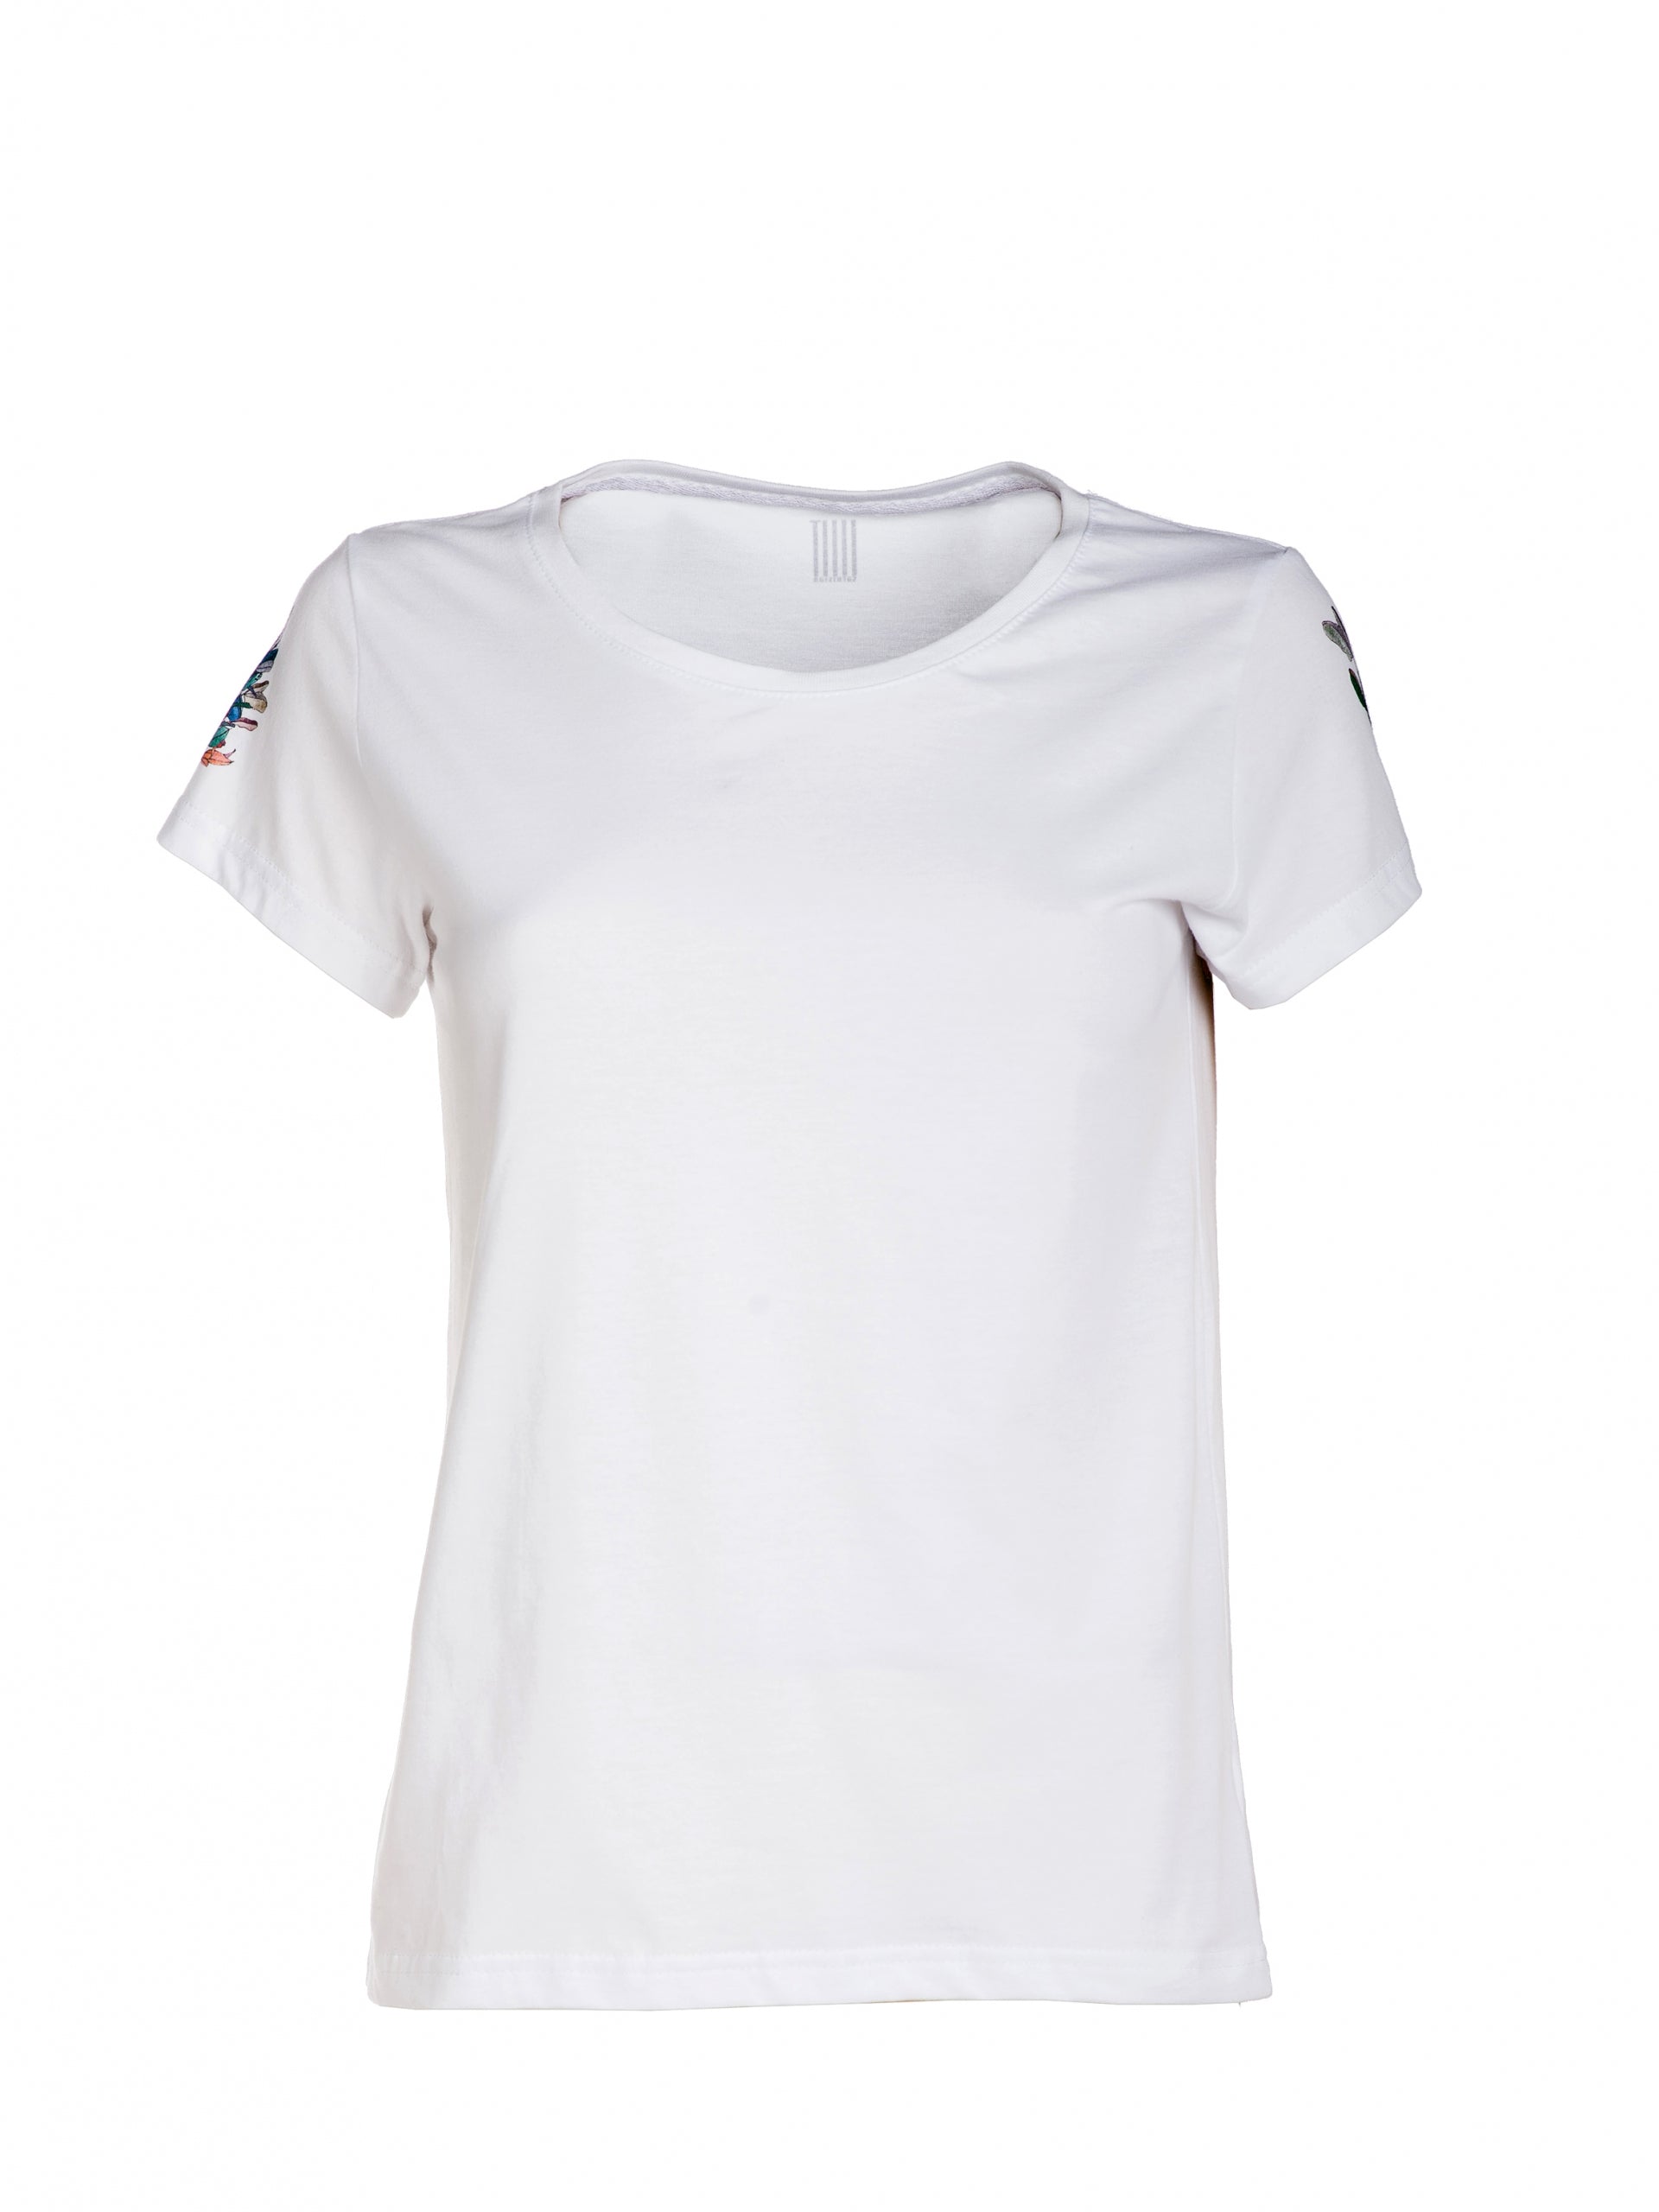 T-shirt Basic with Printed Sleeves